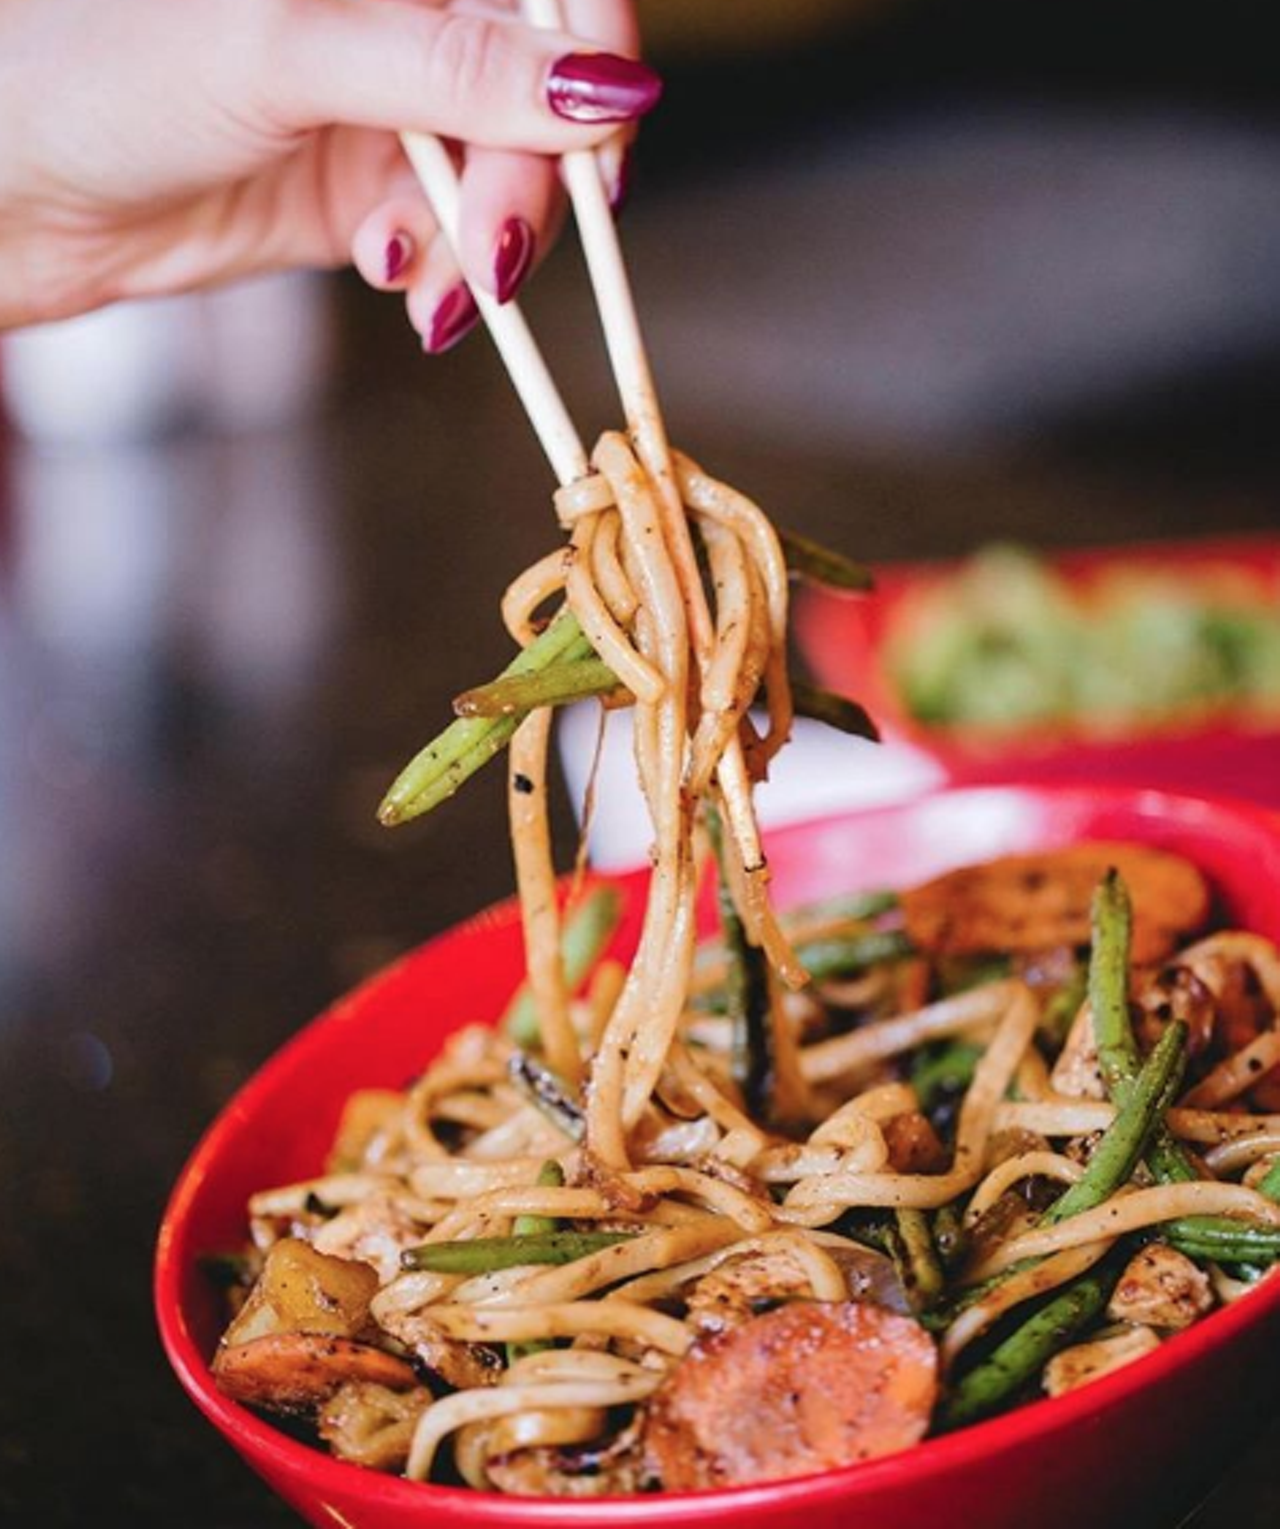 Genghis Grill
Multiple locations, genghisgrill.com
Have a bowl of something delicious, created just like you want it, on your birthday. Make sure you’re on the email list and you can choose from a free appetizer or dessert.
Photo via Instagram / genghisgrill